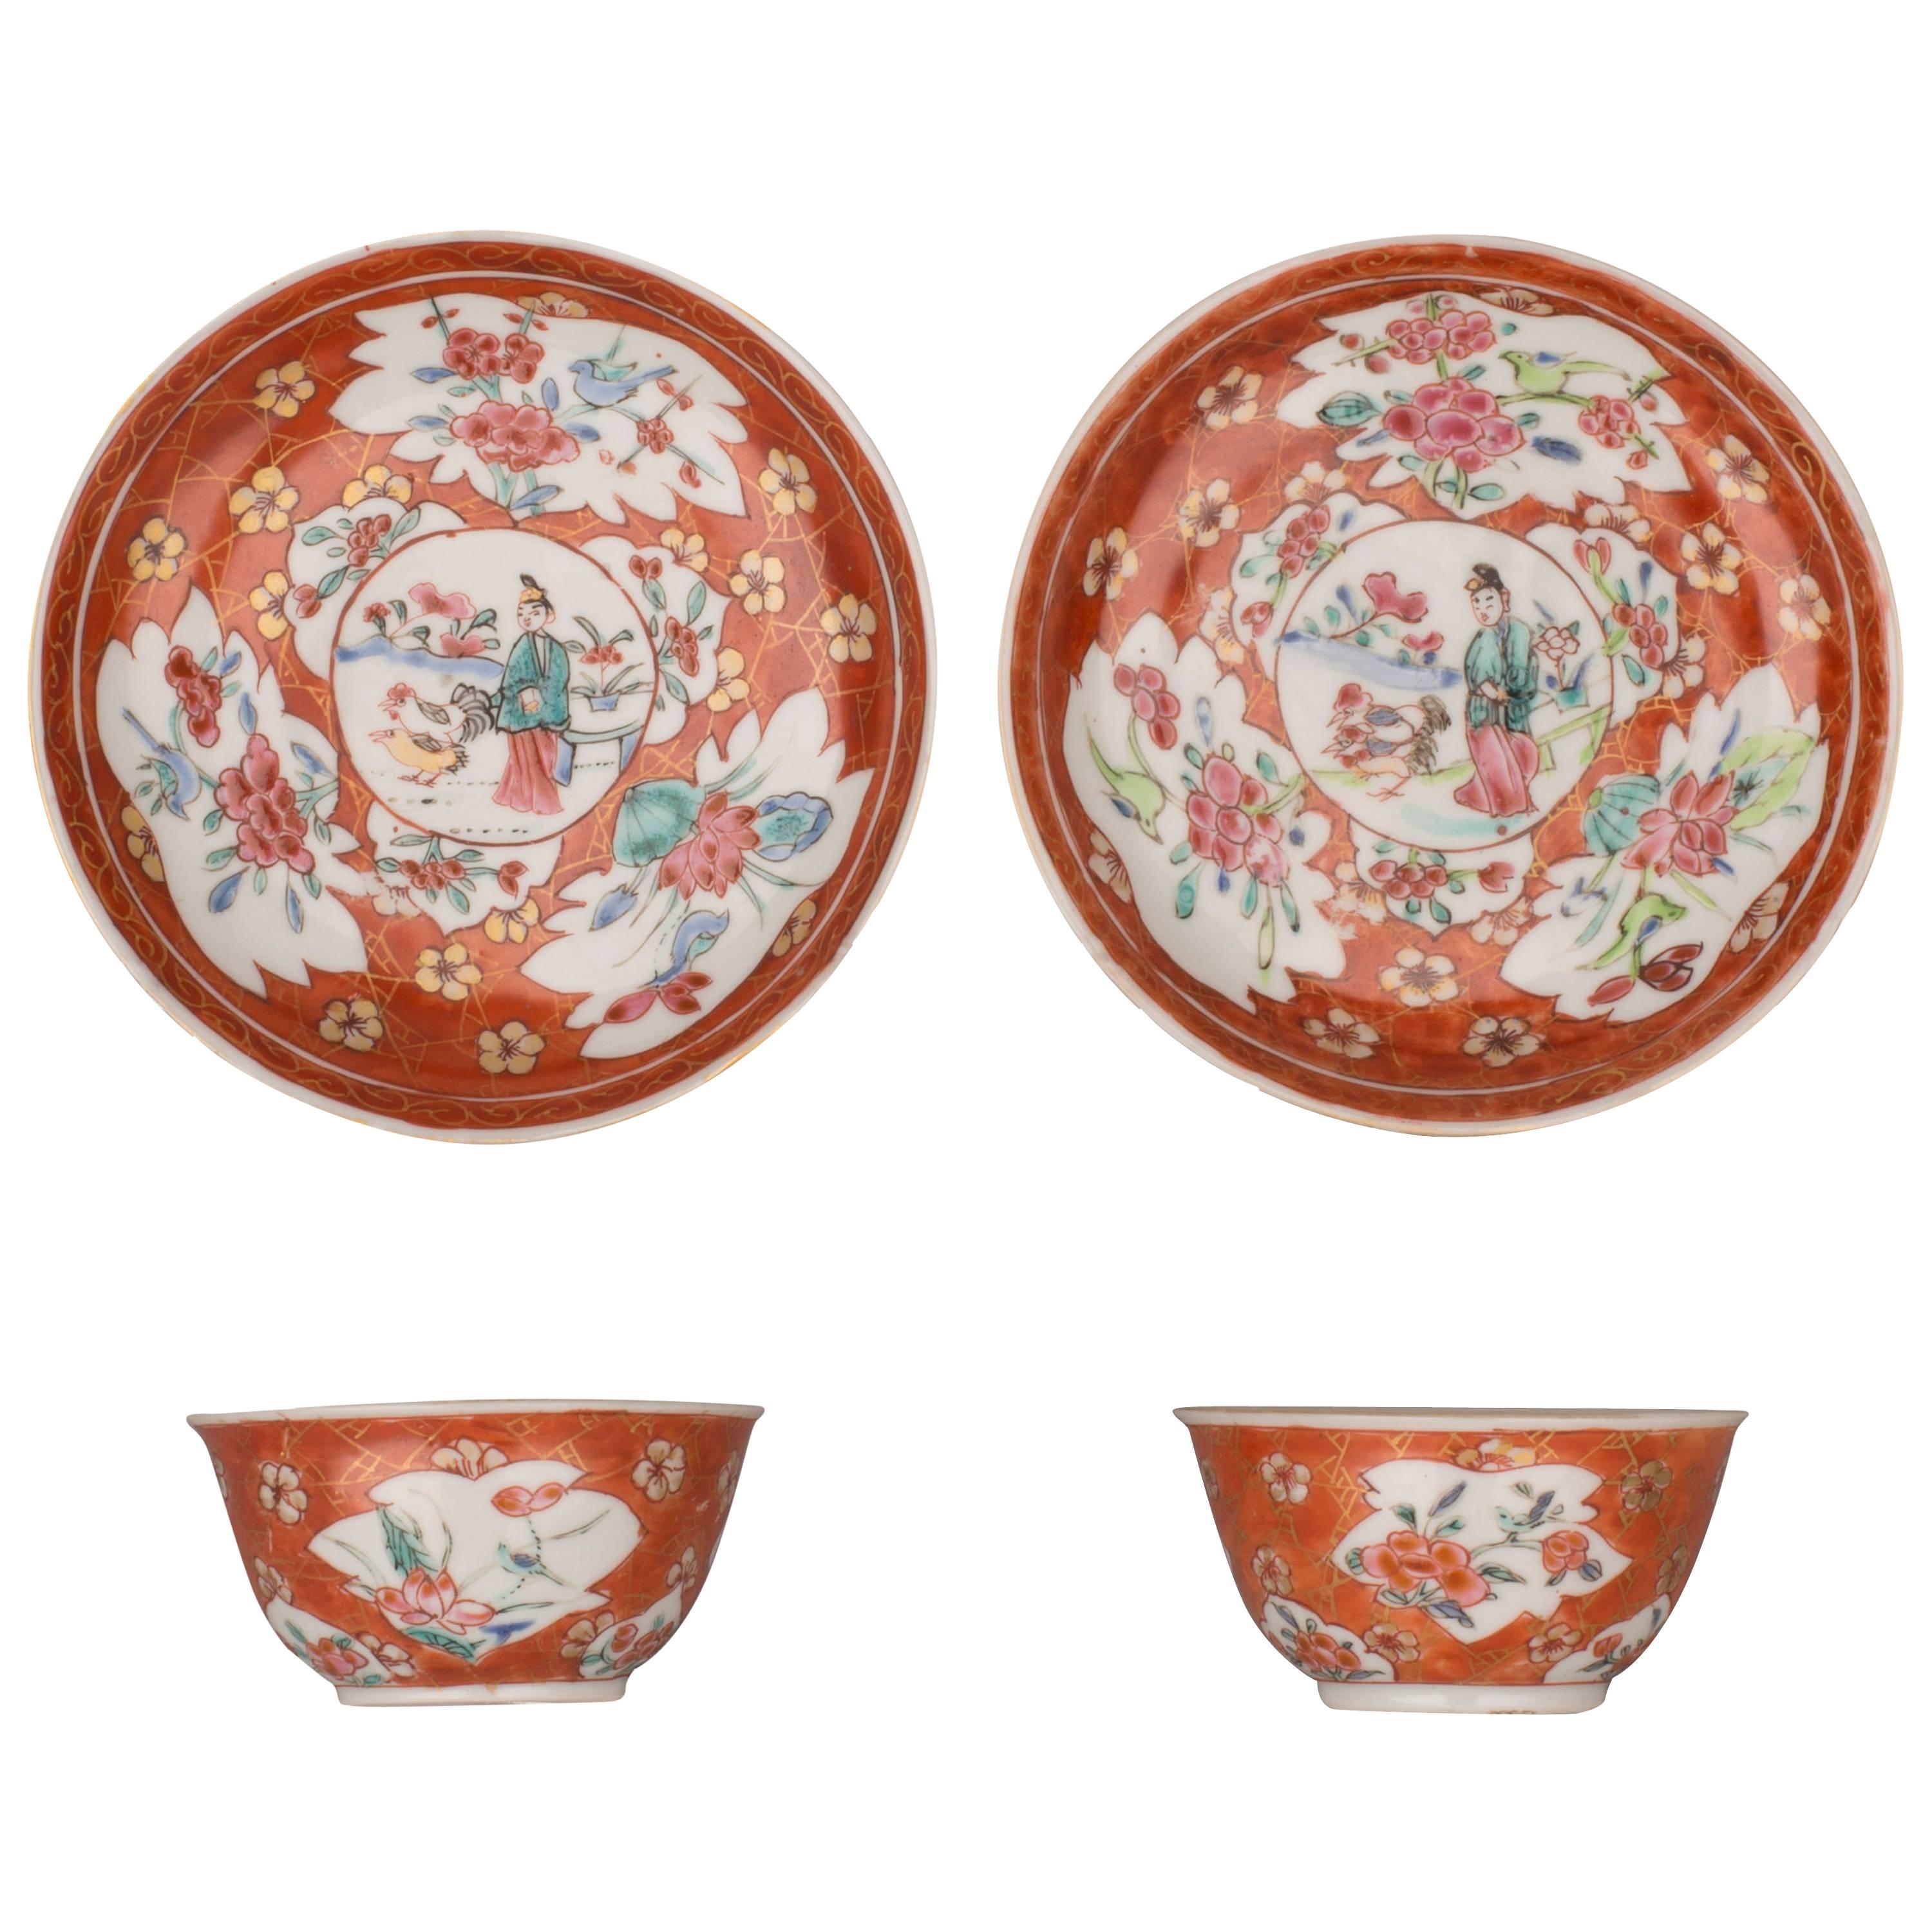 Pair of Chinese Porcelain Famille Rose Cups and Saucers, 18th Century